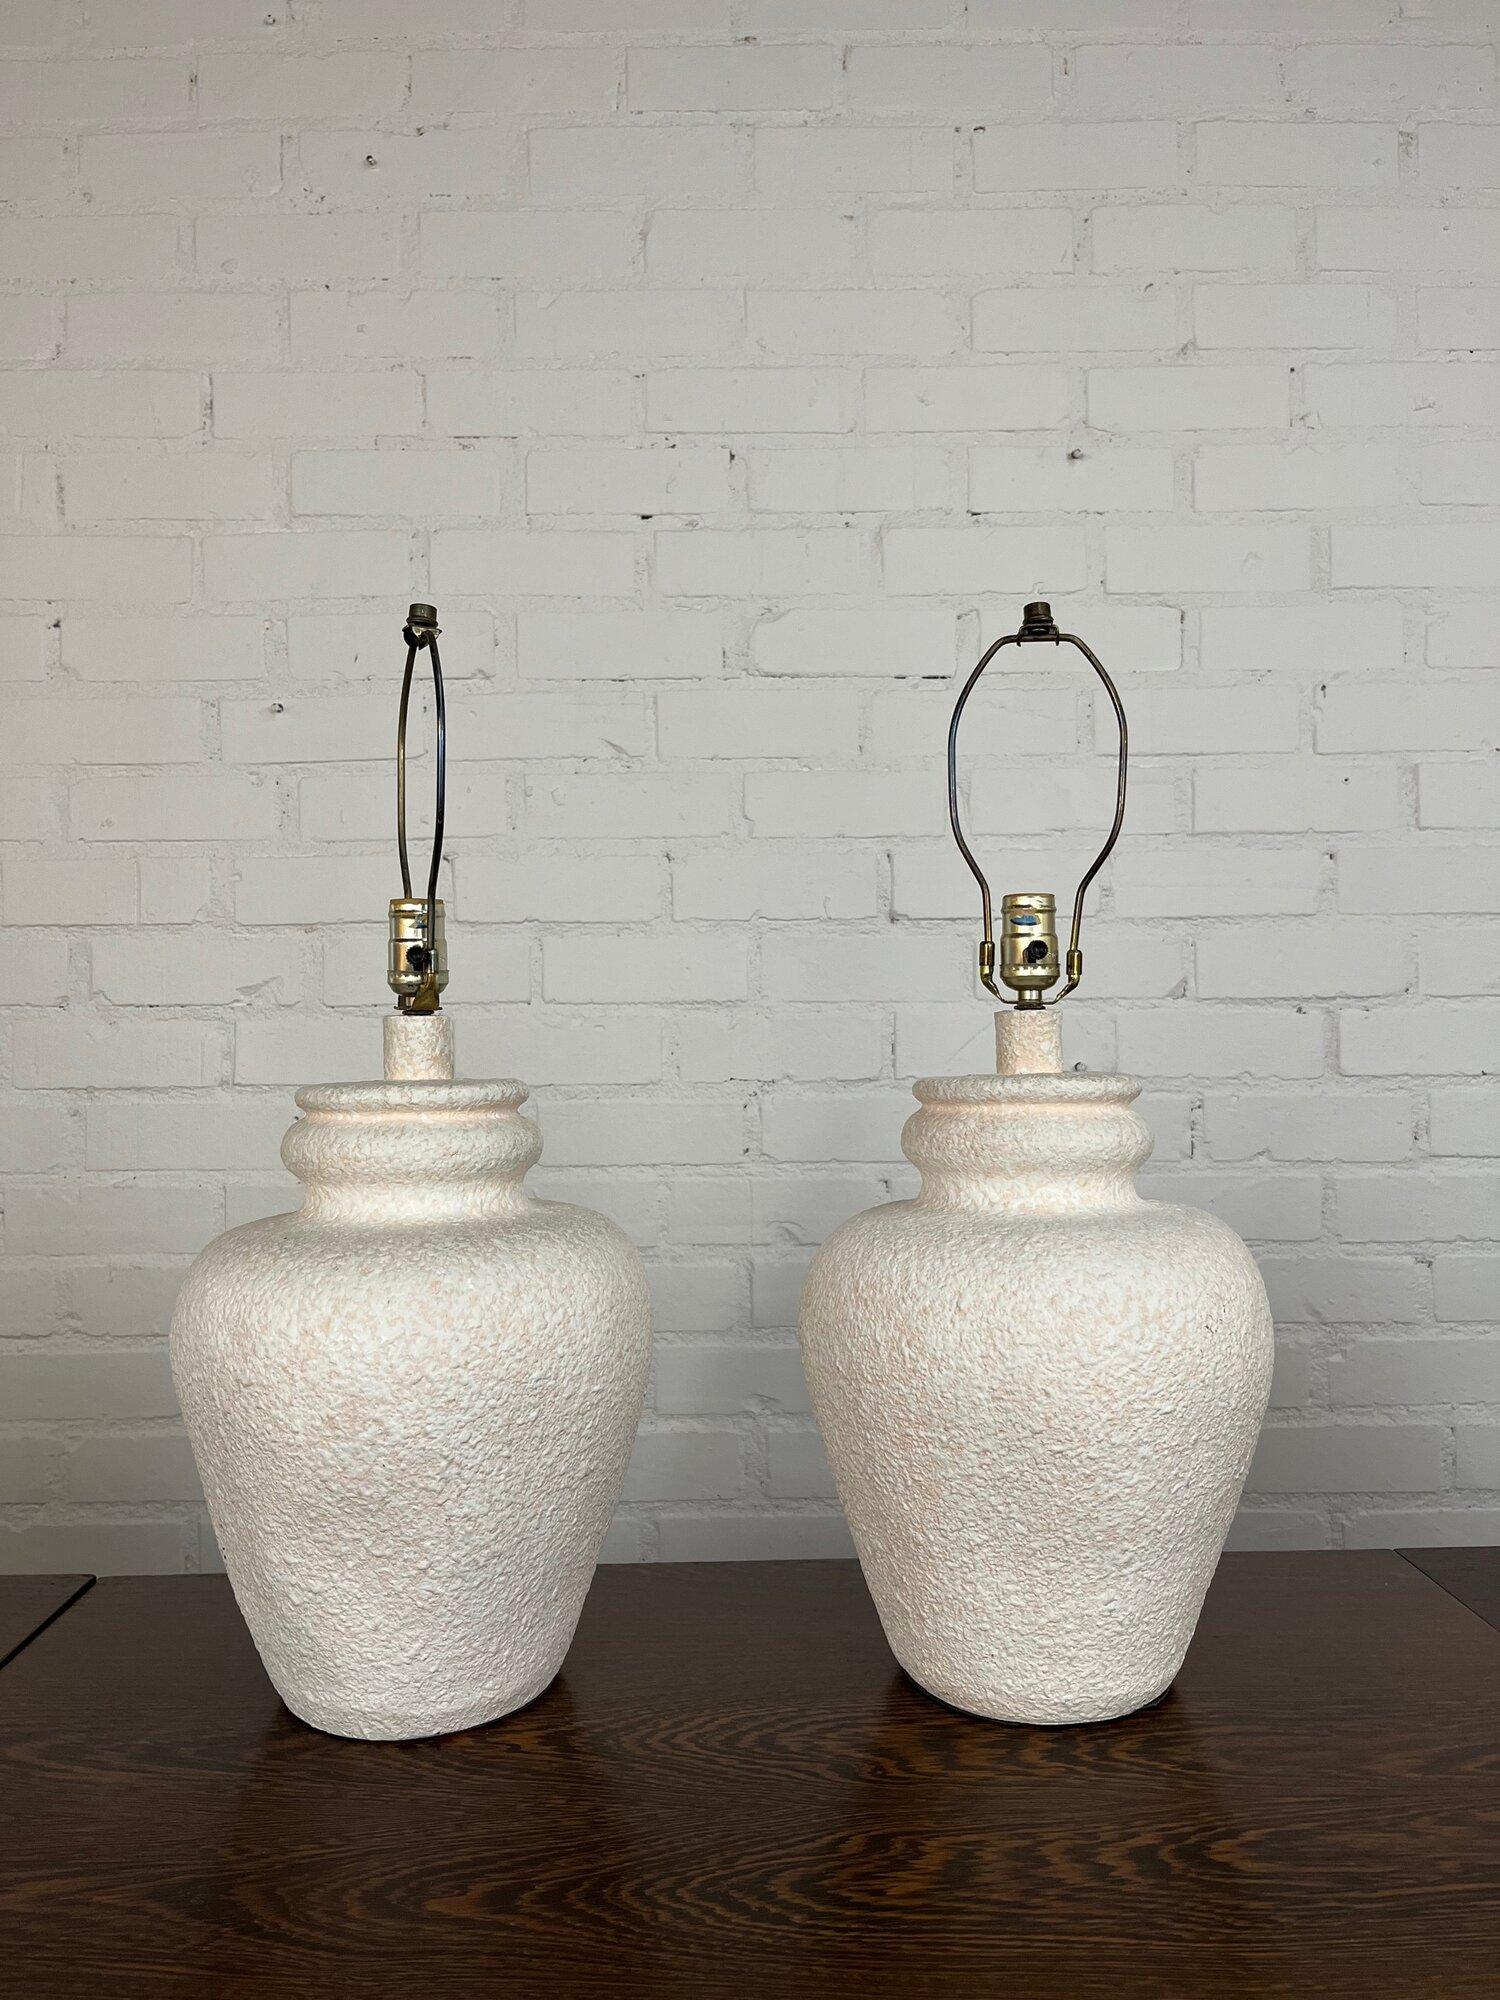 Measures : W11 D11 H25 base 6.

Price is for one, if you would like the pair add both to cart.

Vintage table lamp circa 1980s make in ceramic with a speckled plaster finish. The lamp is a light pink with speckled white over top. Table lamps has